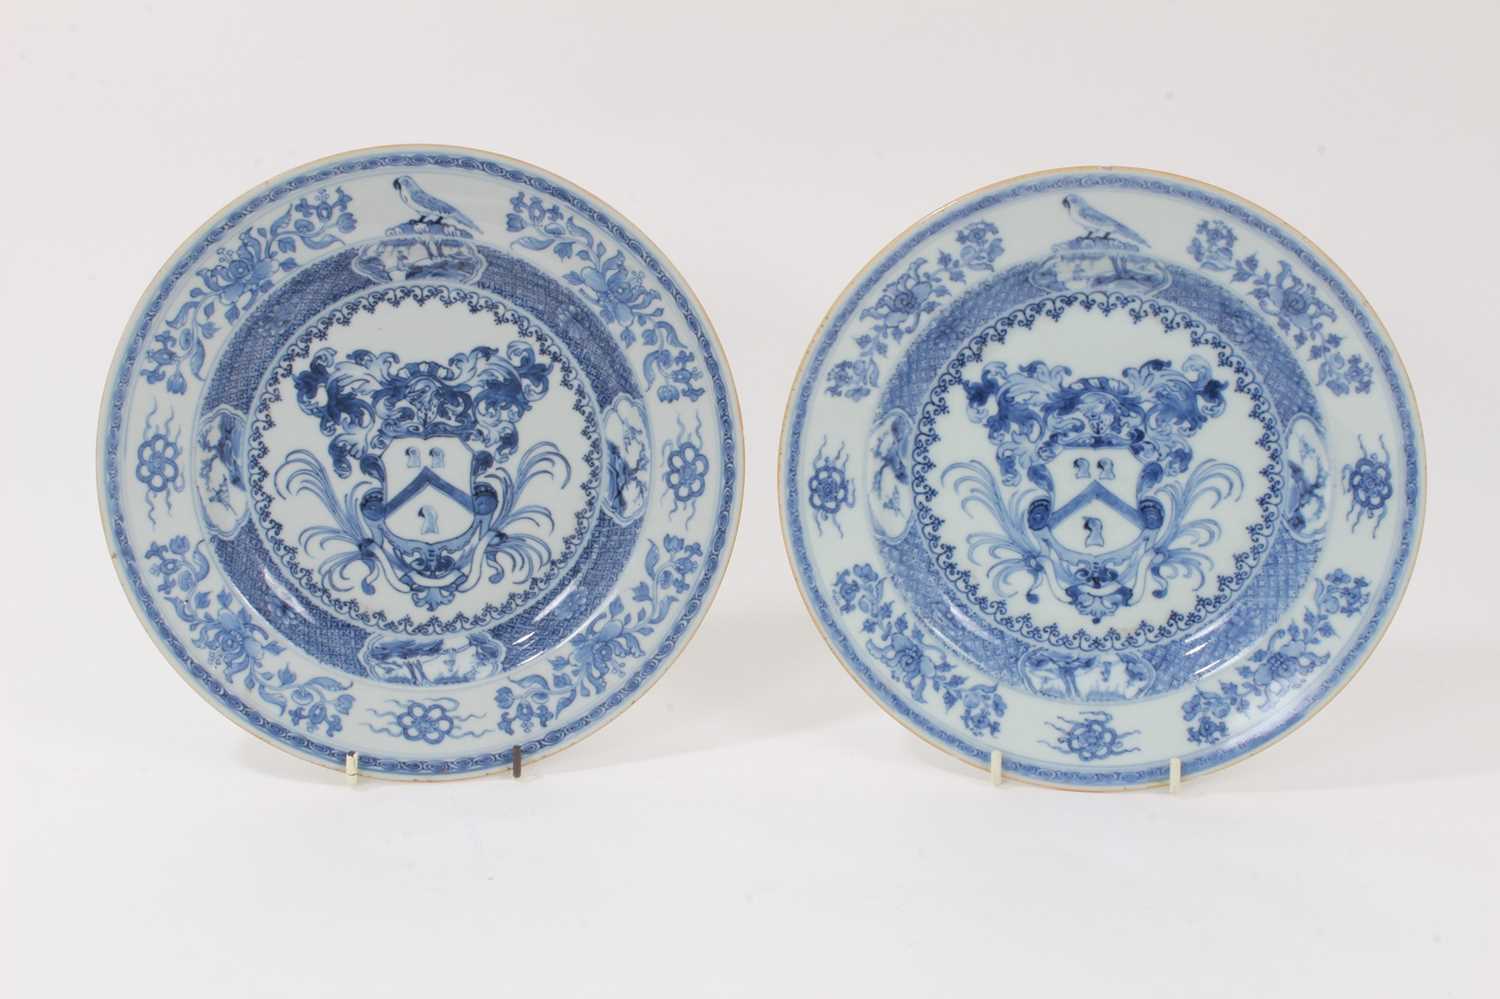 A rare pair of Chinese blue and white armorial plates, circa 1730